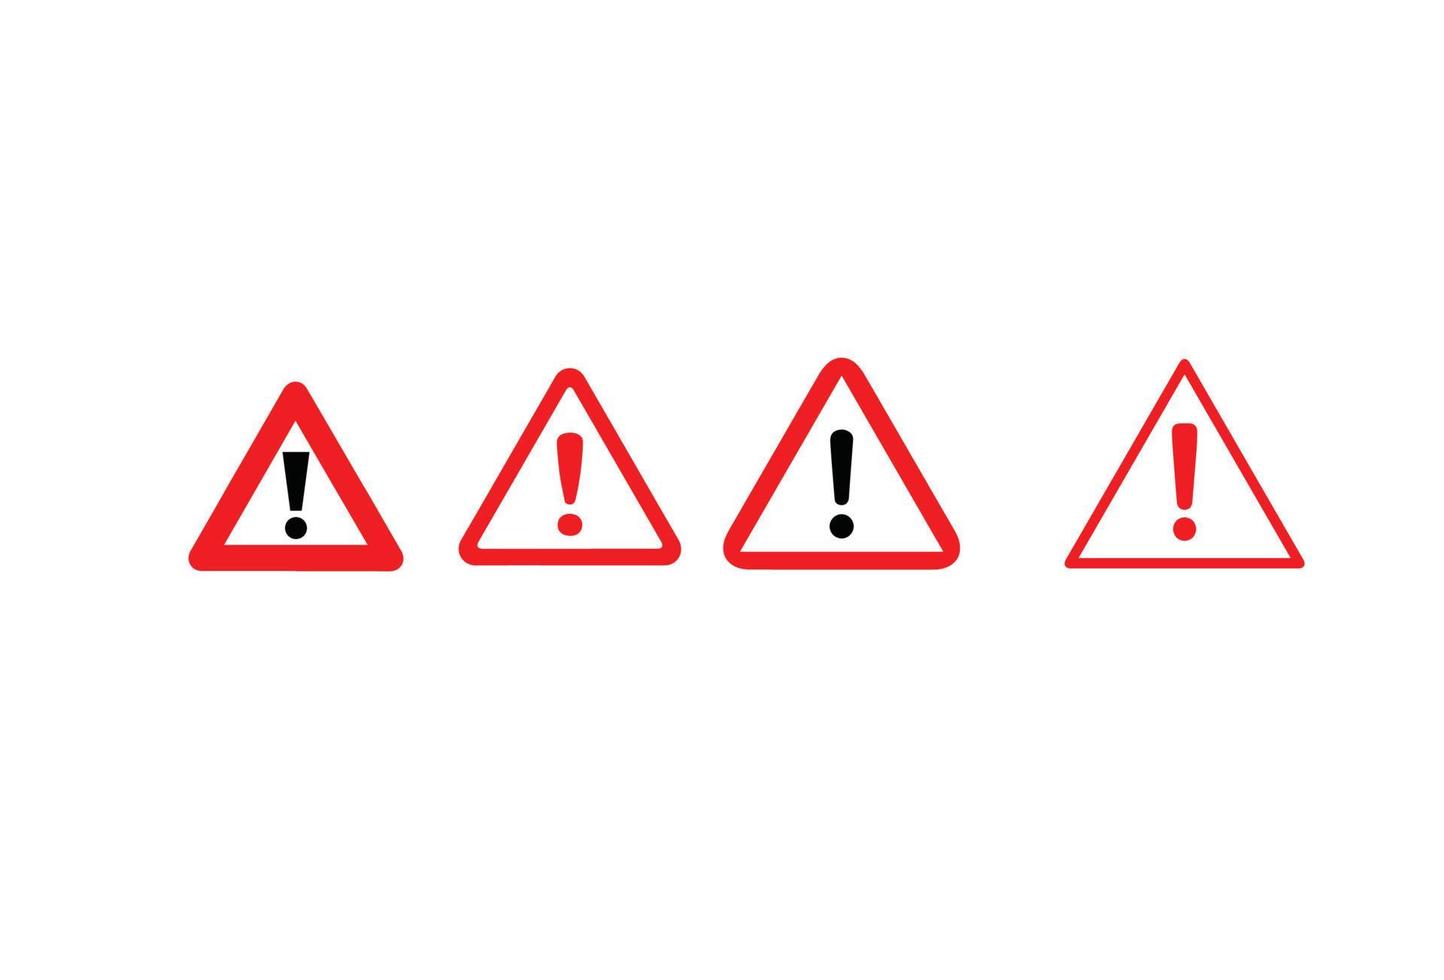 EXCLAMATION triangle traffic sign vector design